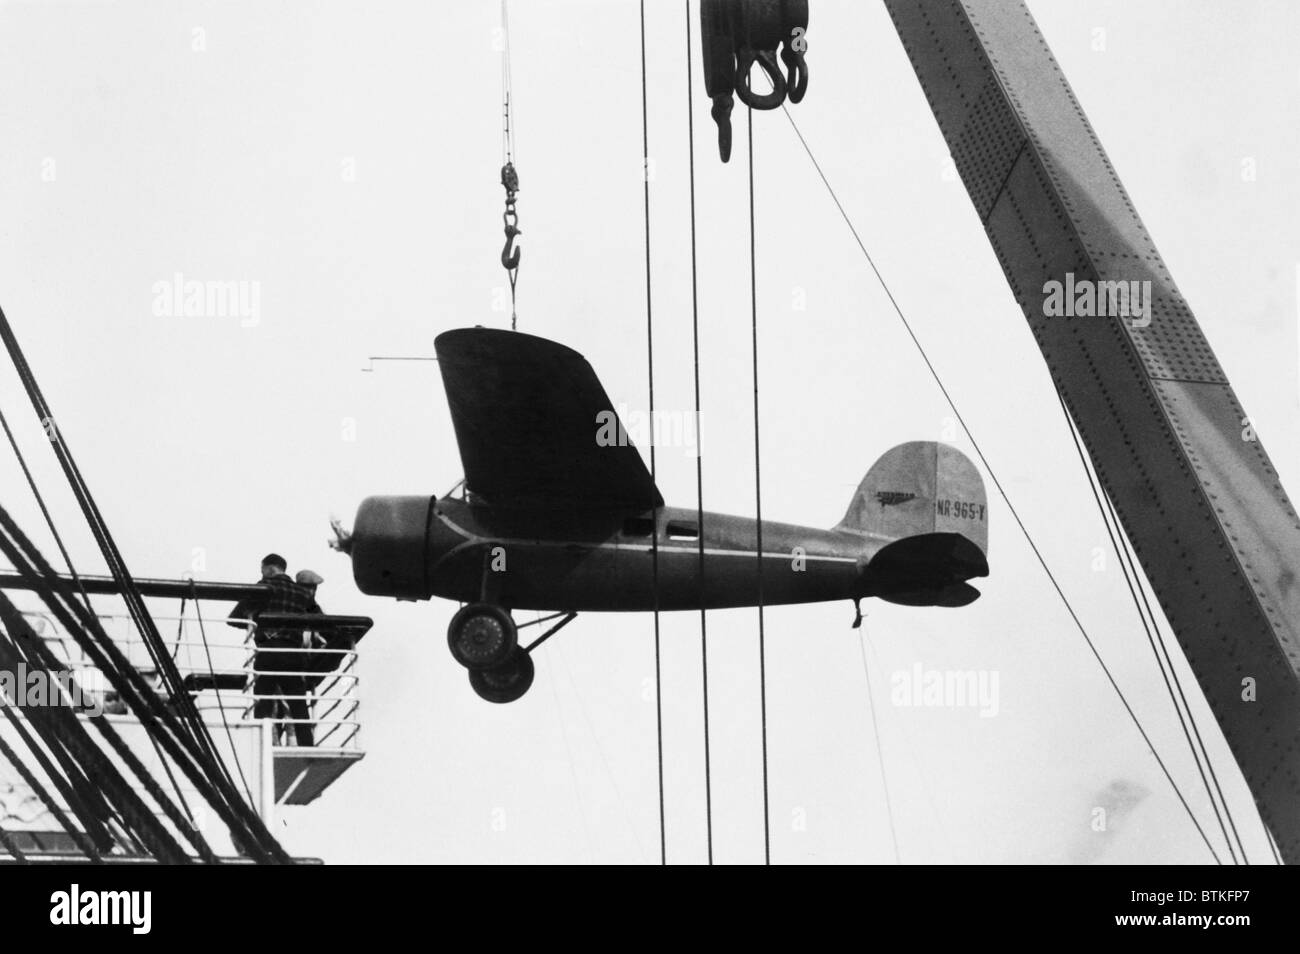 Amelia Earhart's Lockheed Vega airplane being off-loaded from the liner Lurline prior to her solo flight from Hawaii to California. January 1935. Stock Photo